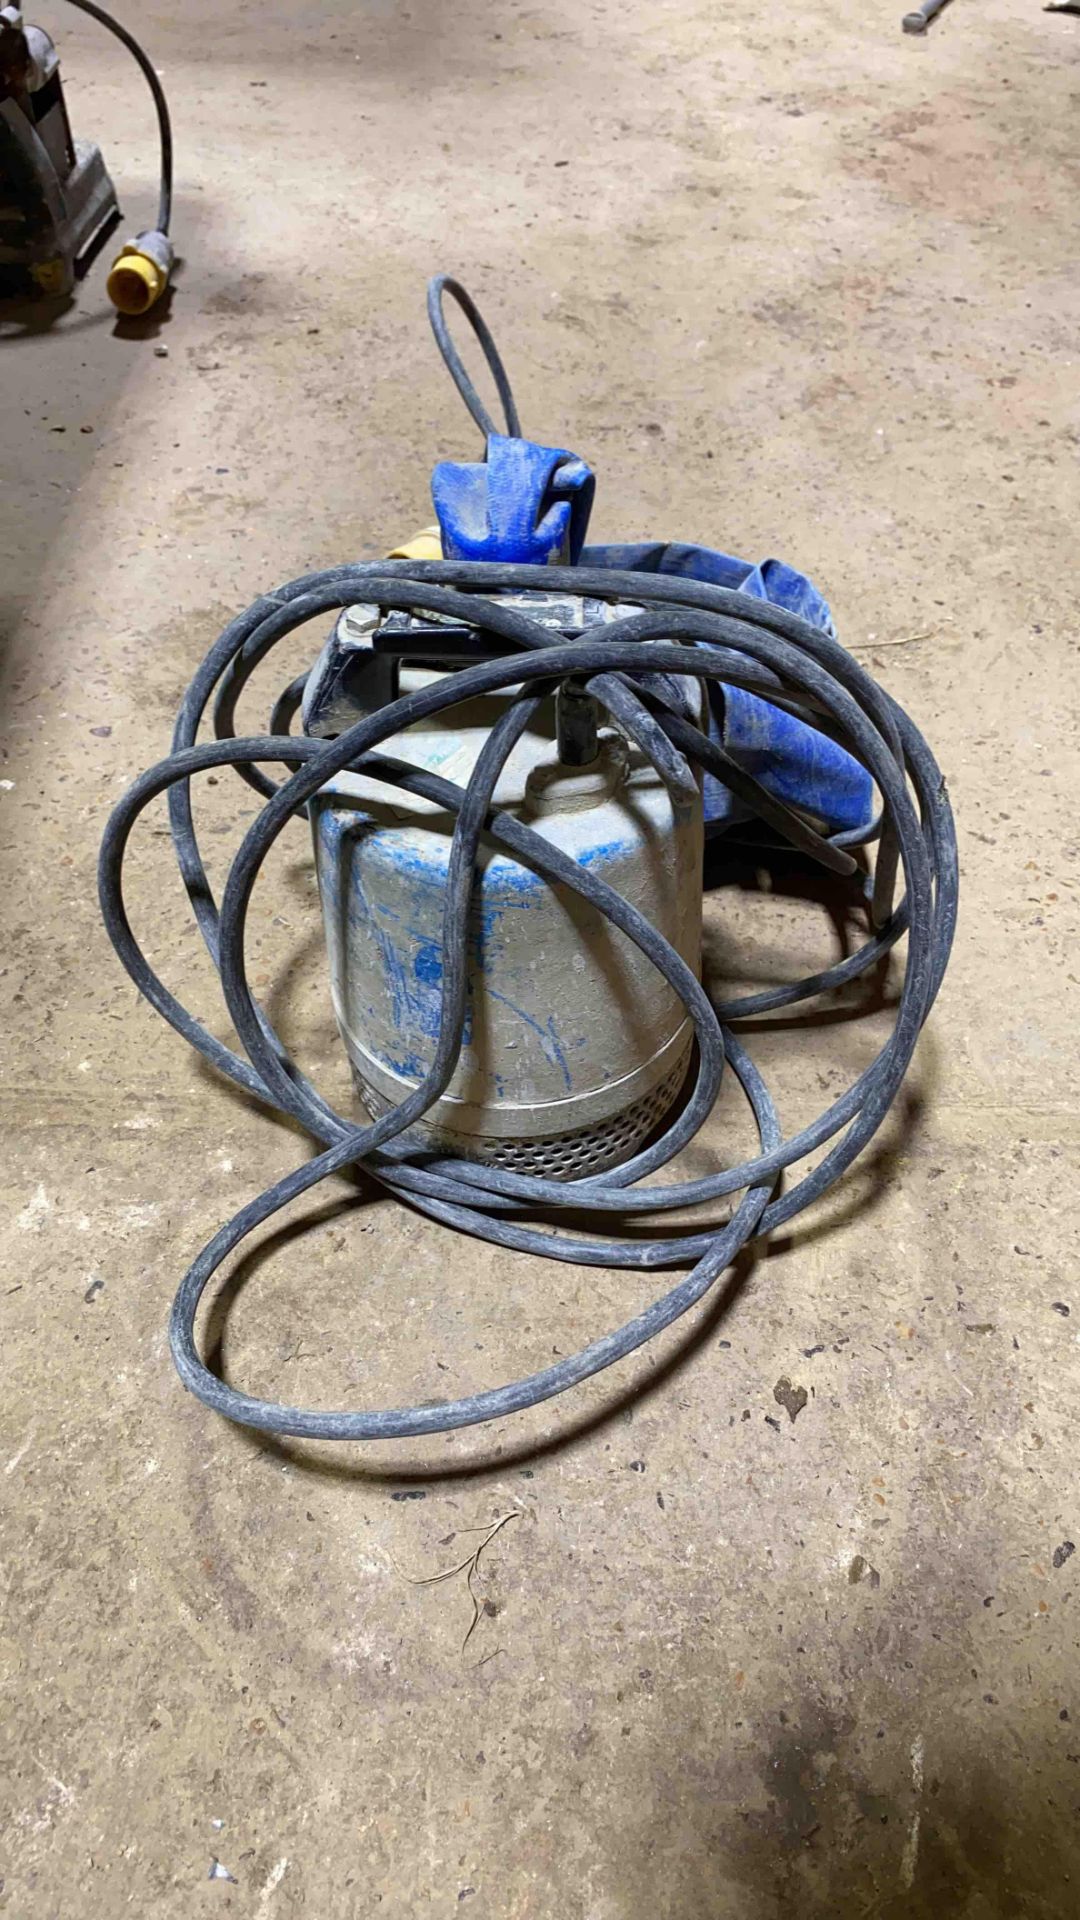 generic 110v air pump with hose attachment - Image 2 of 3